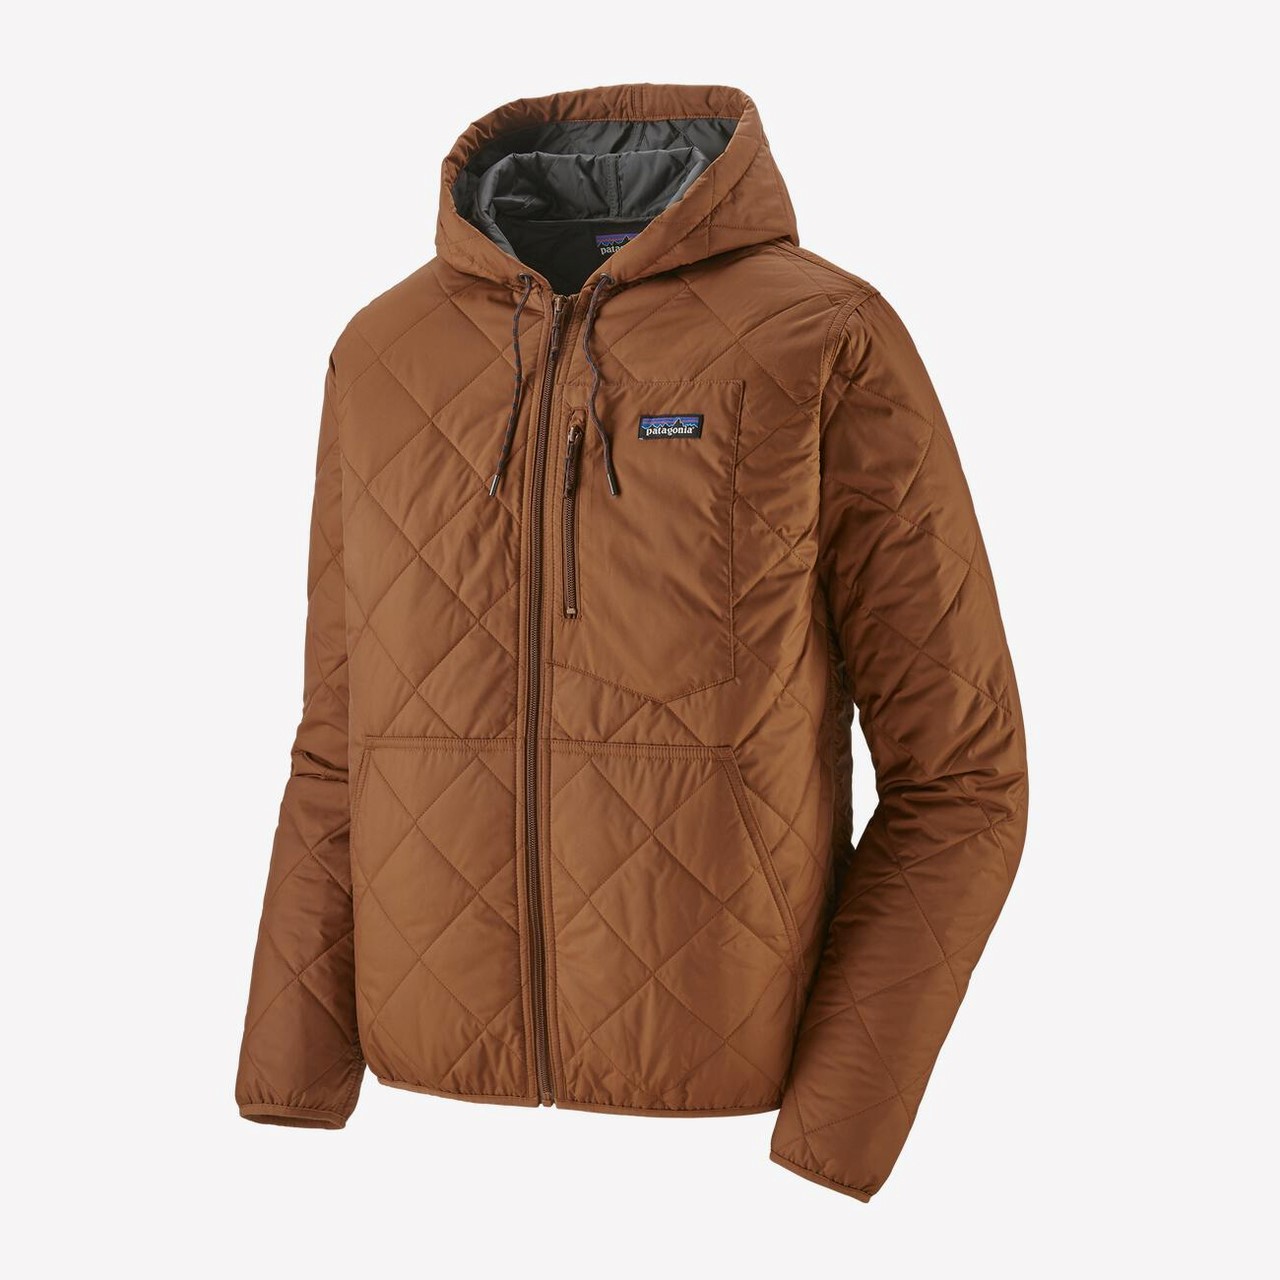 Patagonia M's Diamond Quilted Bomber Hoody - Earthworm Brown - Small